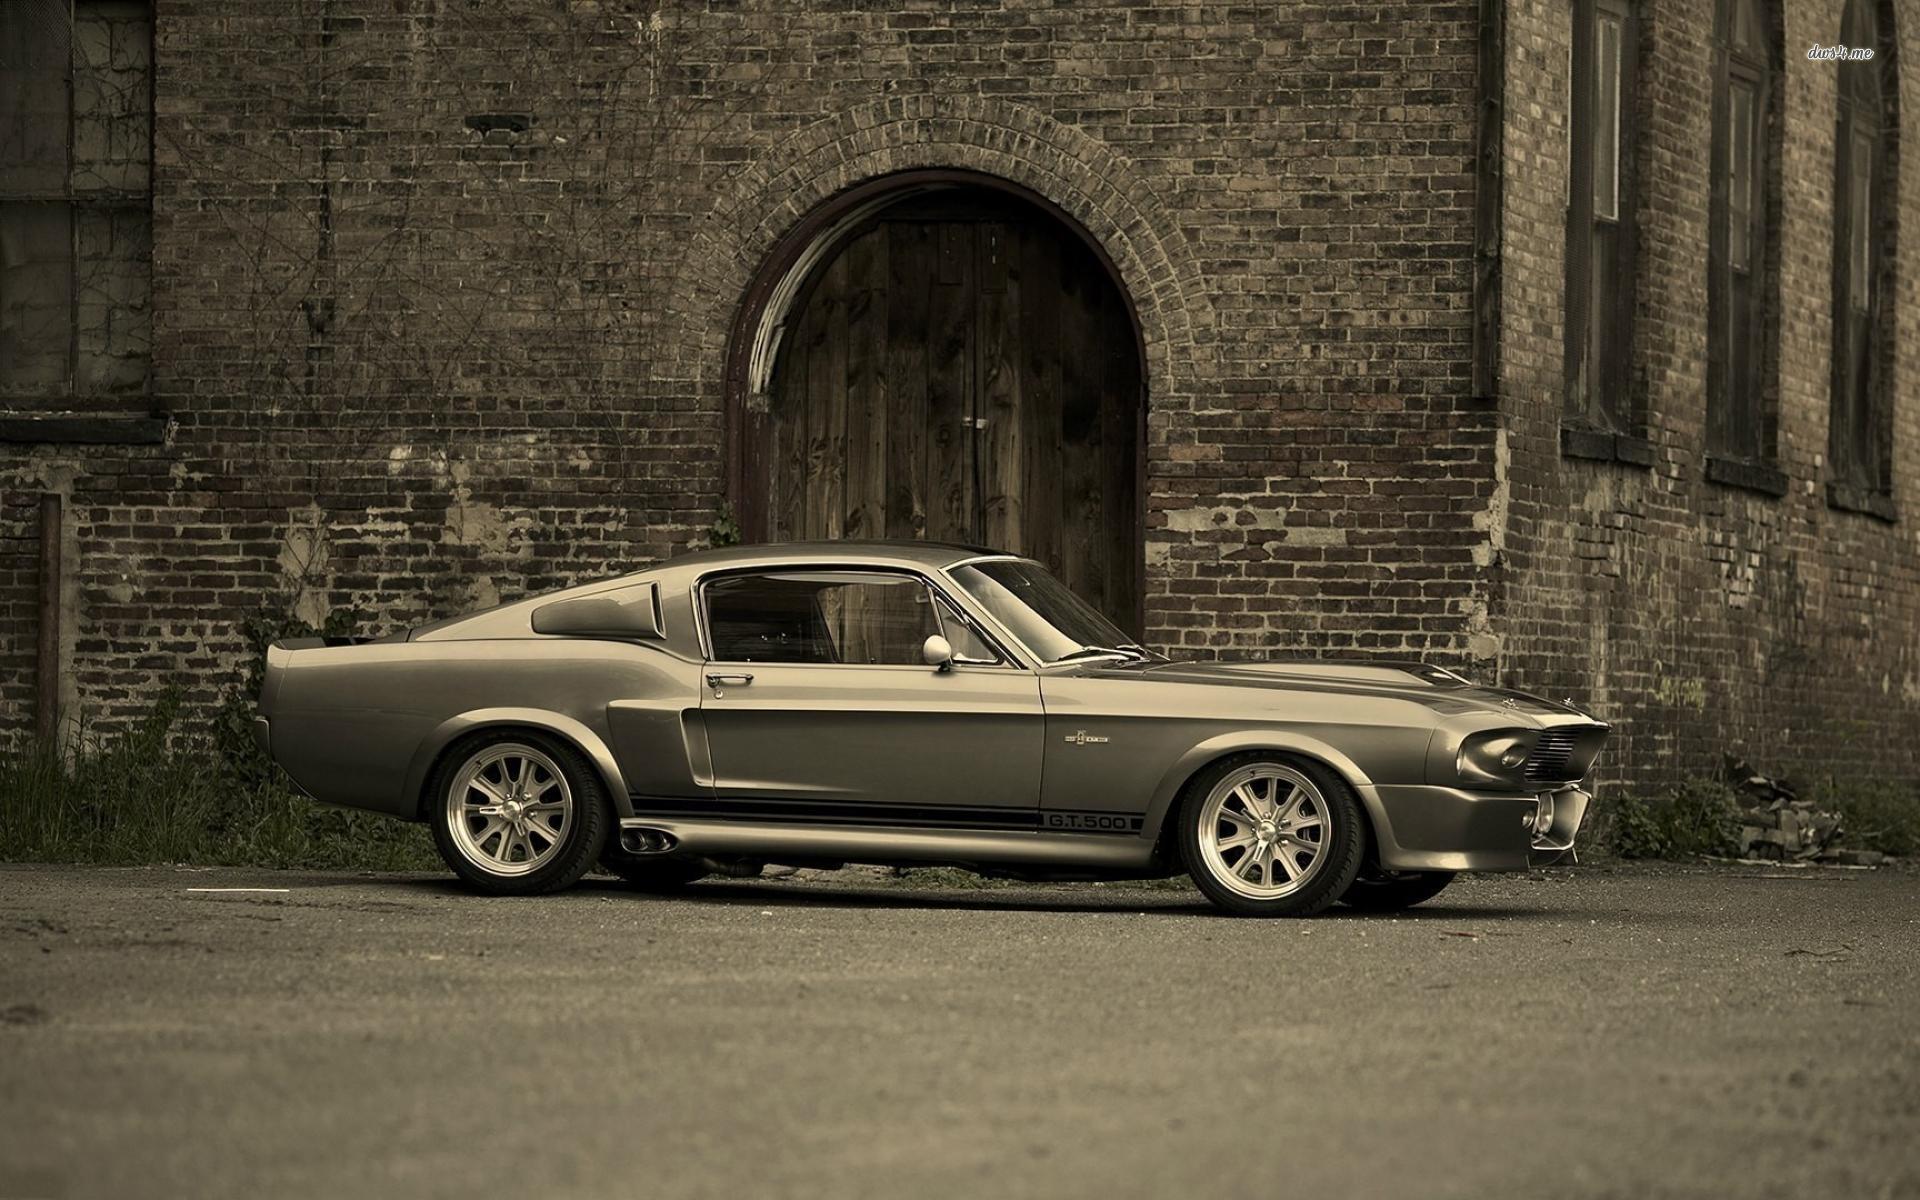 Ford Mustang Shelby GT 500 Eleanor wallpaper - Car wallpapers - #11404